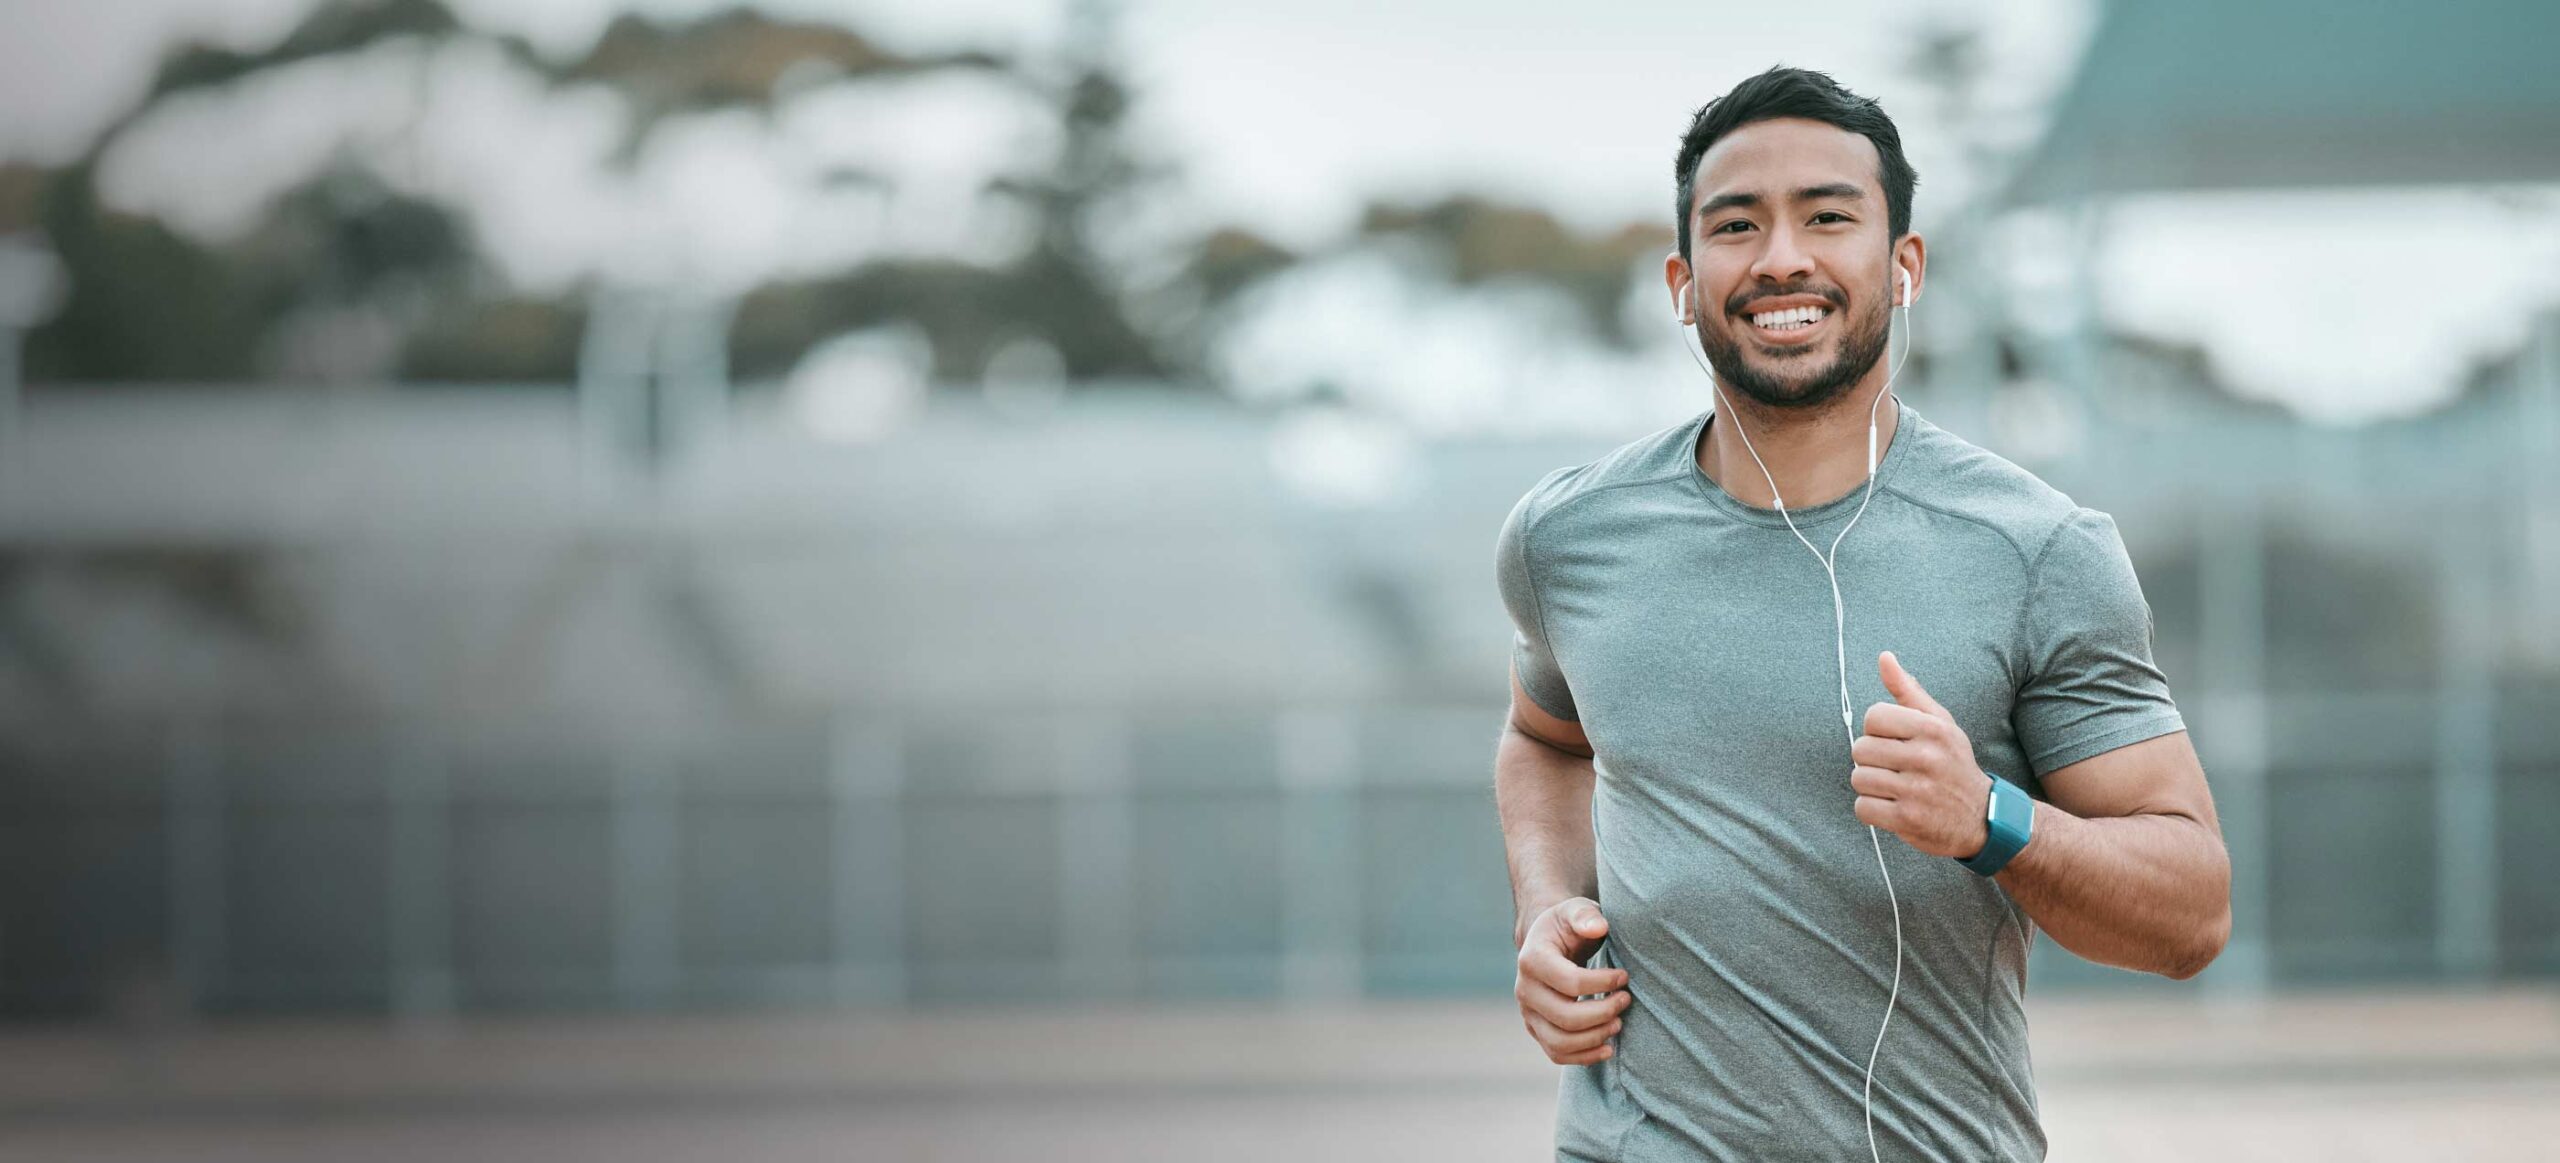 Person running with headphones